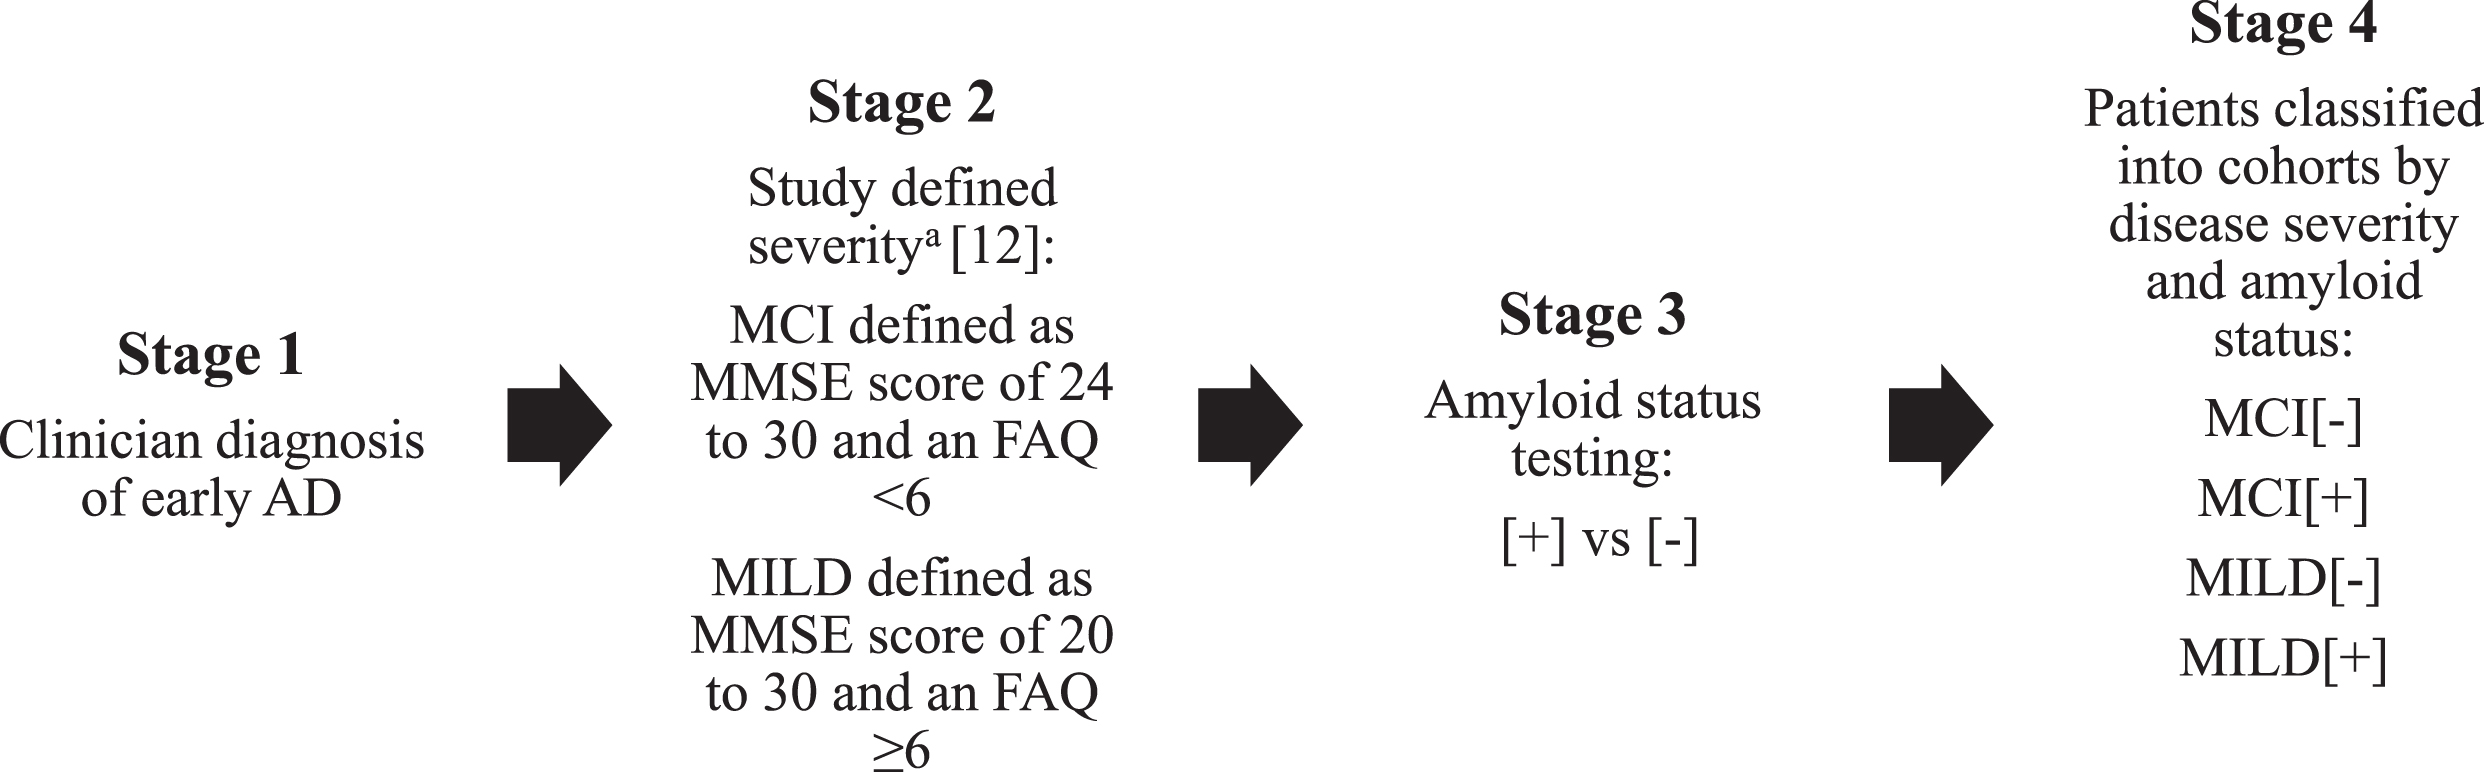 Four-Stage Approach of Study Disease Classification. aPatients falling outside of these ranges were classified as MCI or MILD based on their current clinician-reported diagnosis. If patients were missing a diagnosis they were excluded from the analyses. FAQ, Functional Activities Questionnaire; MCI, mild cognitive impairment; MILD, mild dementia; MMSE, Mini-Mental State Examination; [+], amyloid positive; [–], amyloid negative.